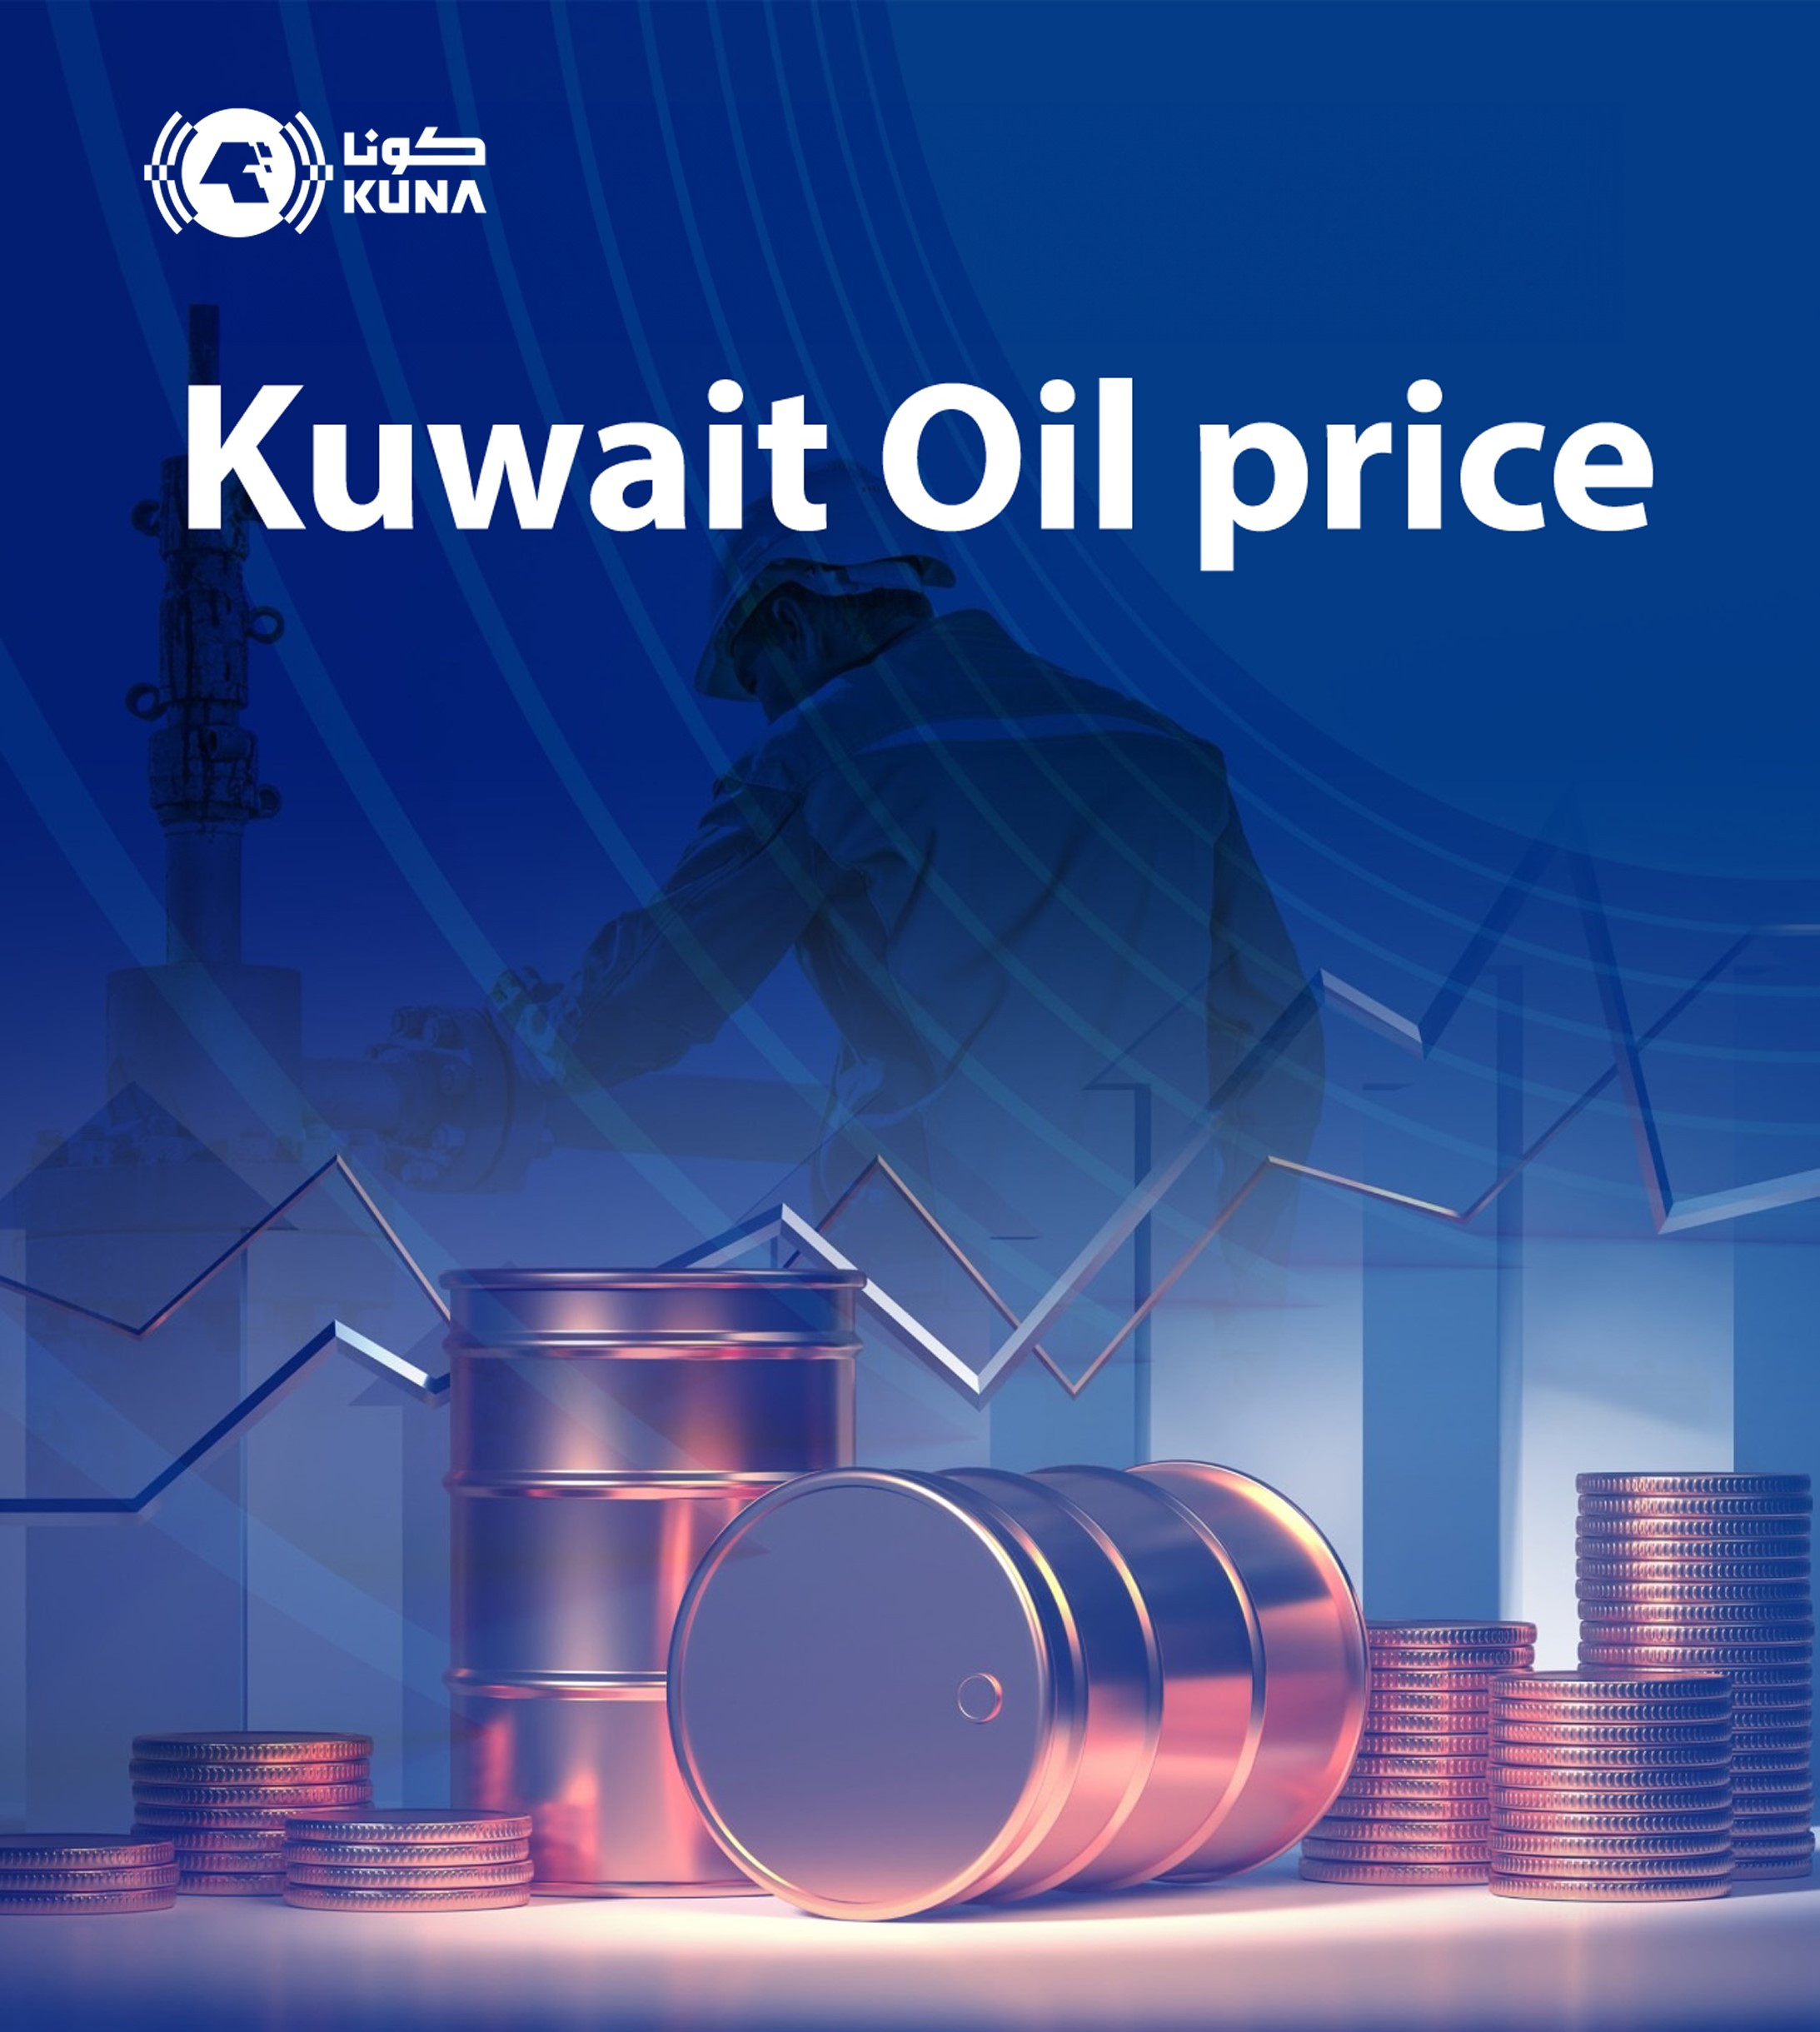 Kuwait oil price up 77 cents Tues. to USD 90.89 pb - KPC                                                                                                                                                                                                  